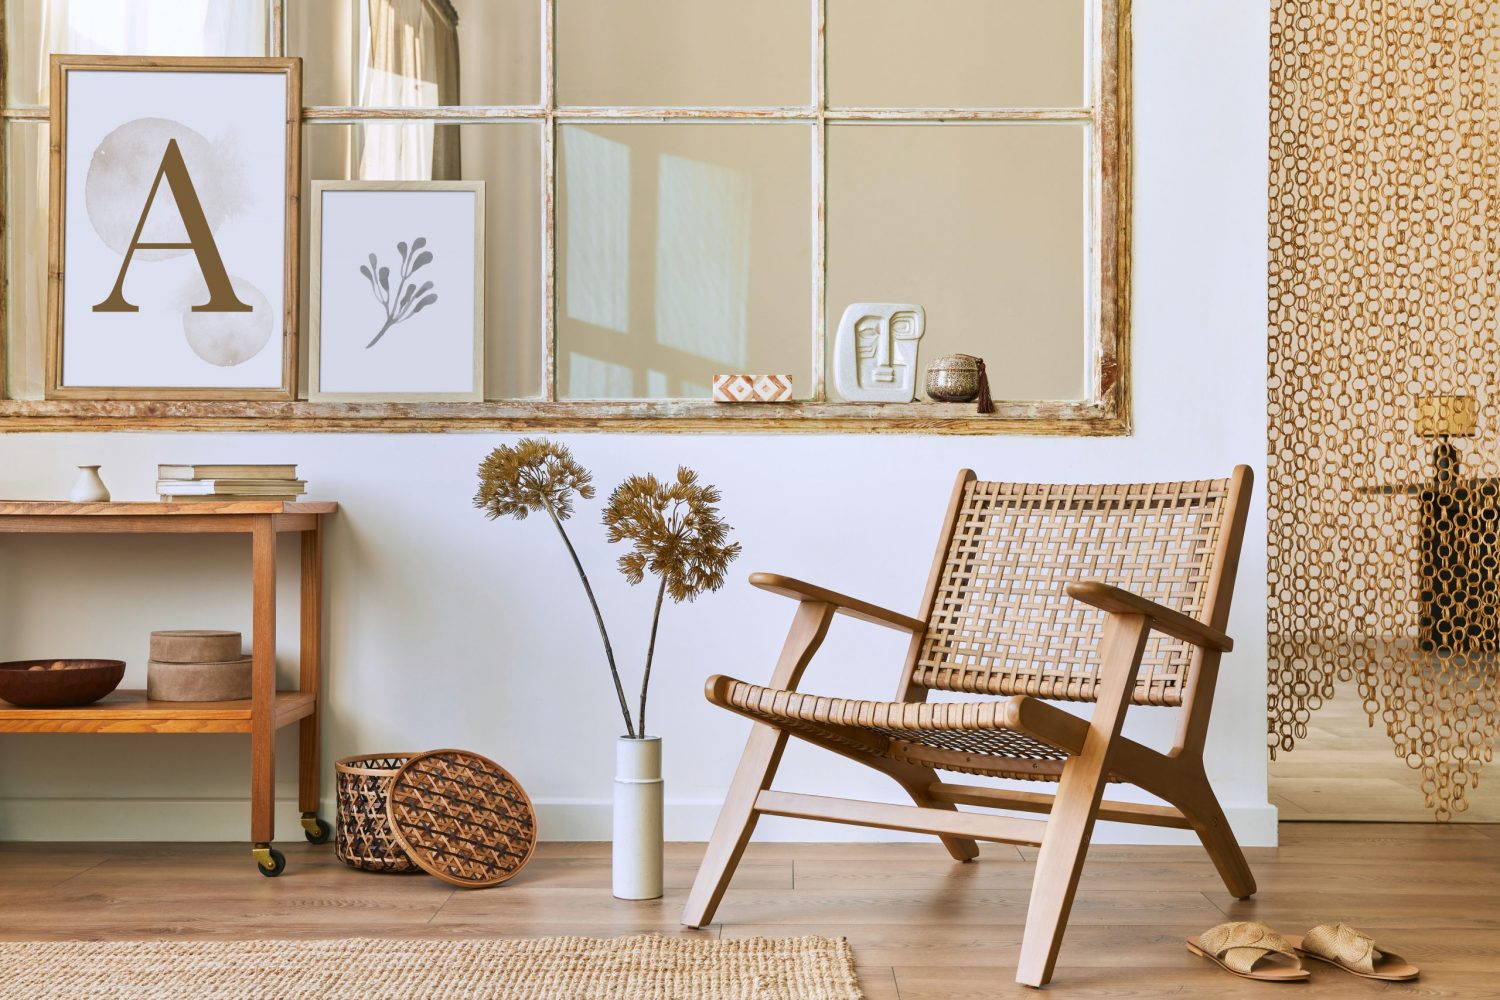 A wood lounge chair with rattan seating and backing is the focal point in this highly neutral room, also featuring wood floors, a woven jute rug, a wicker basket, a two-tier wooden coffee table on wheels with shelves housing decor items, a large French-pane indoor window with rustic trim and some decor elements along the ledge such as a couple photo frames and decorations, and a hanging curtain in the doorway made of chain-linked straw.